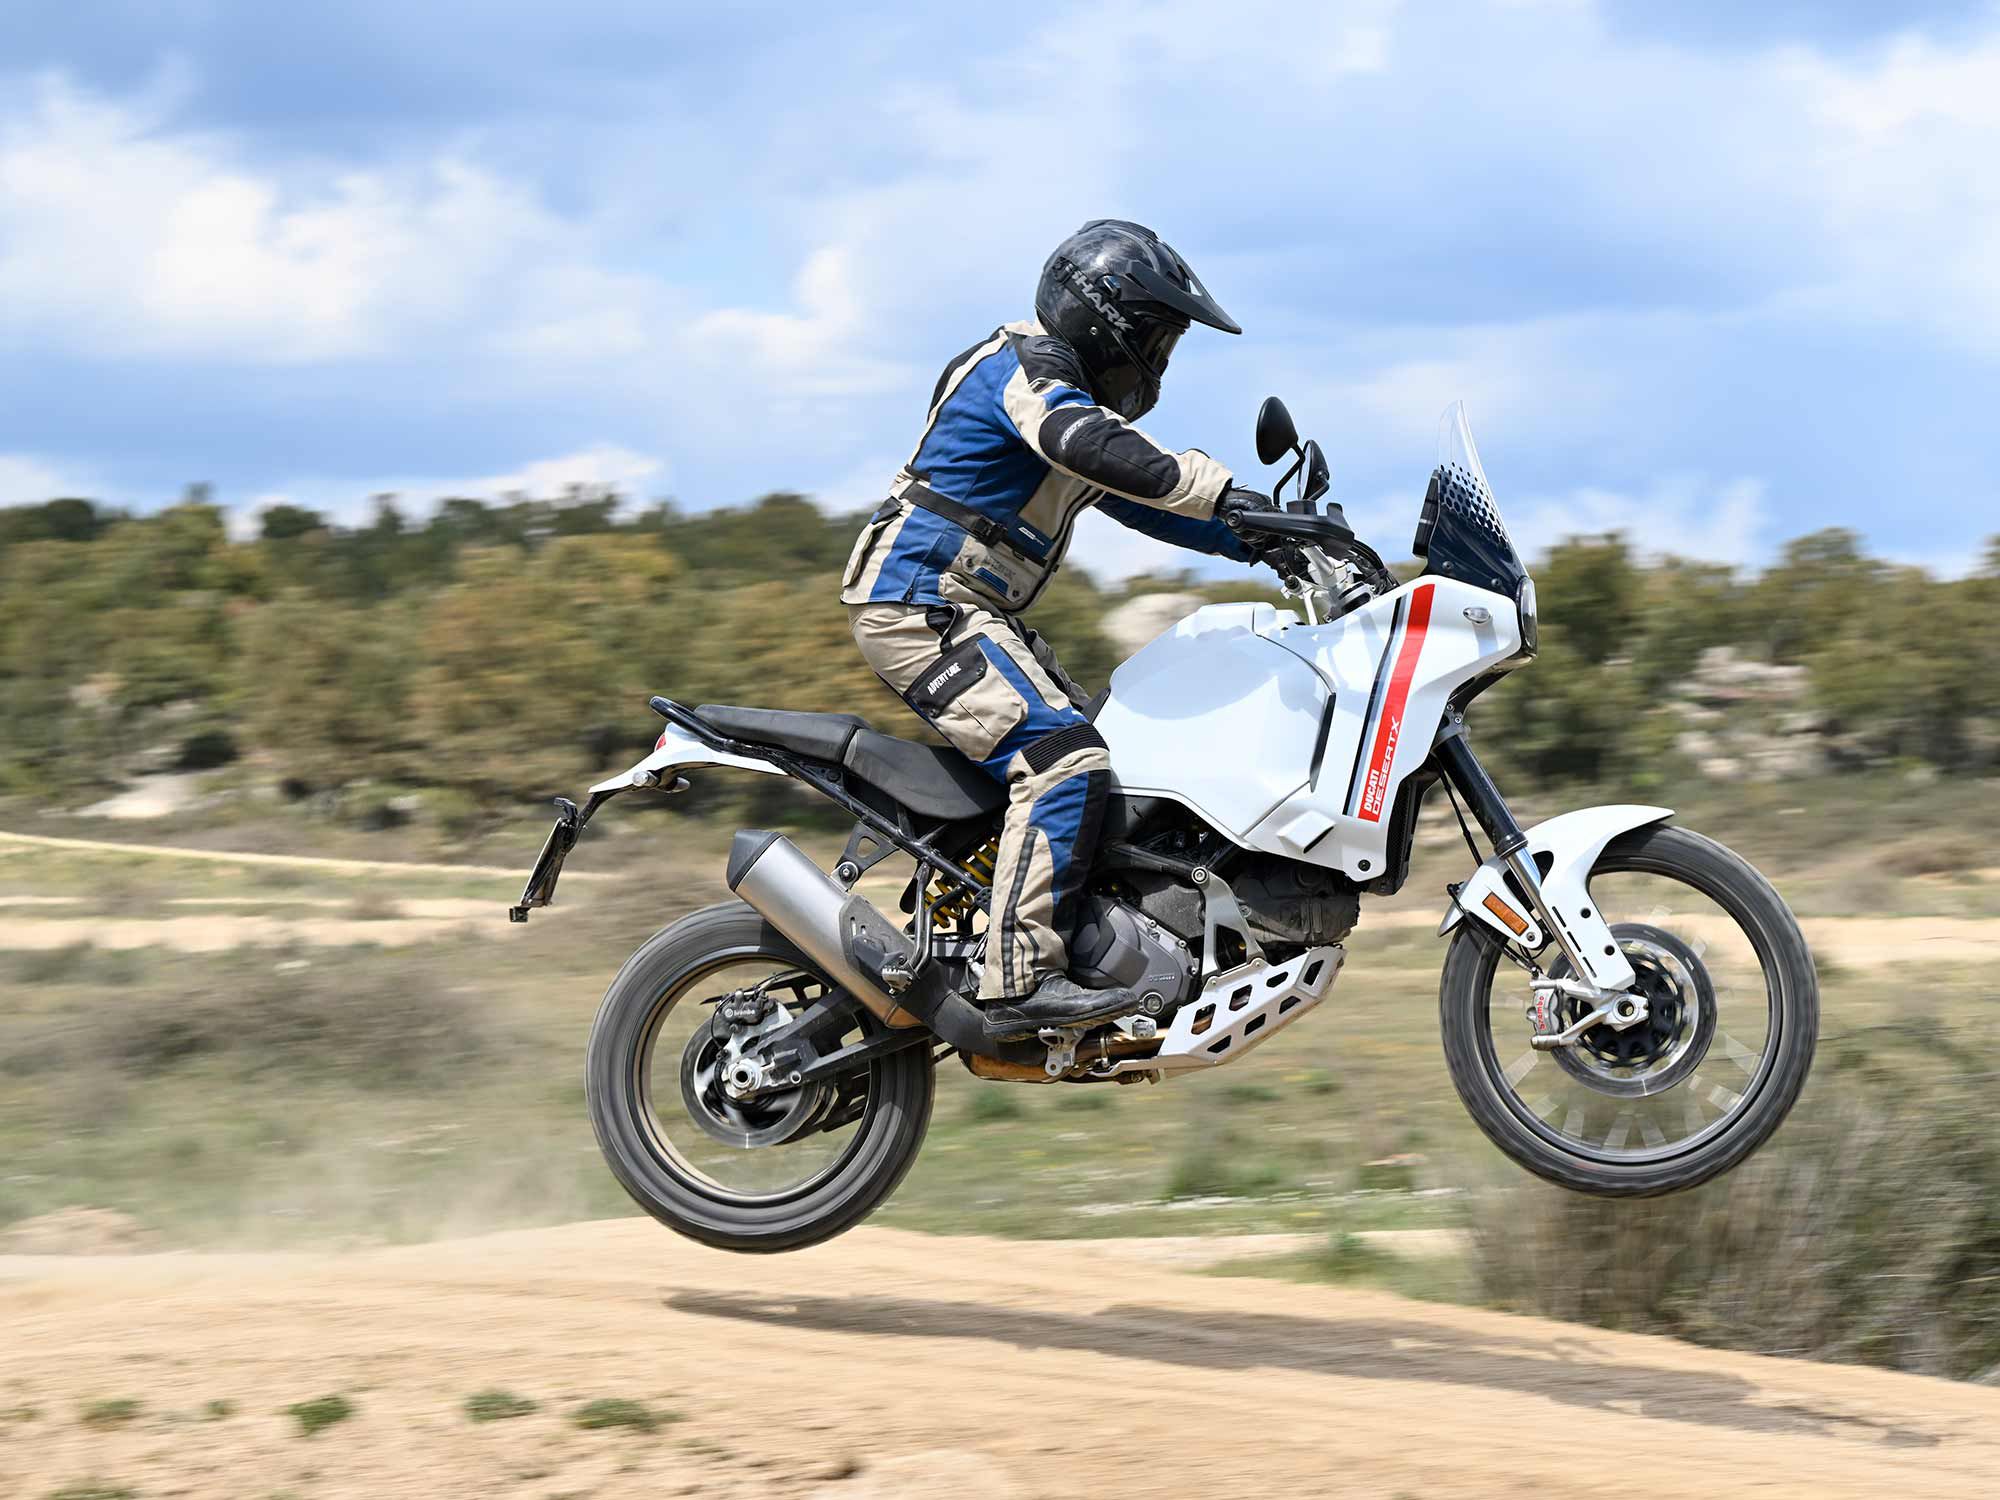 The familiar Testastretta motor can be found across the Ducati range in the Multistrada V2, Supersport 950, Hypermotard 950, and the Monster.